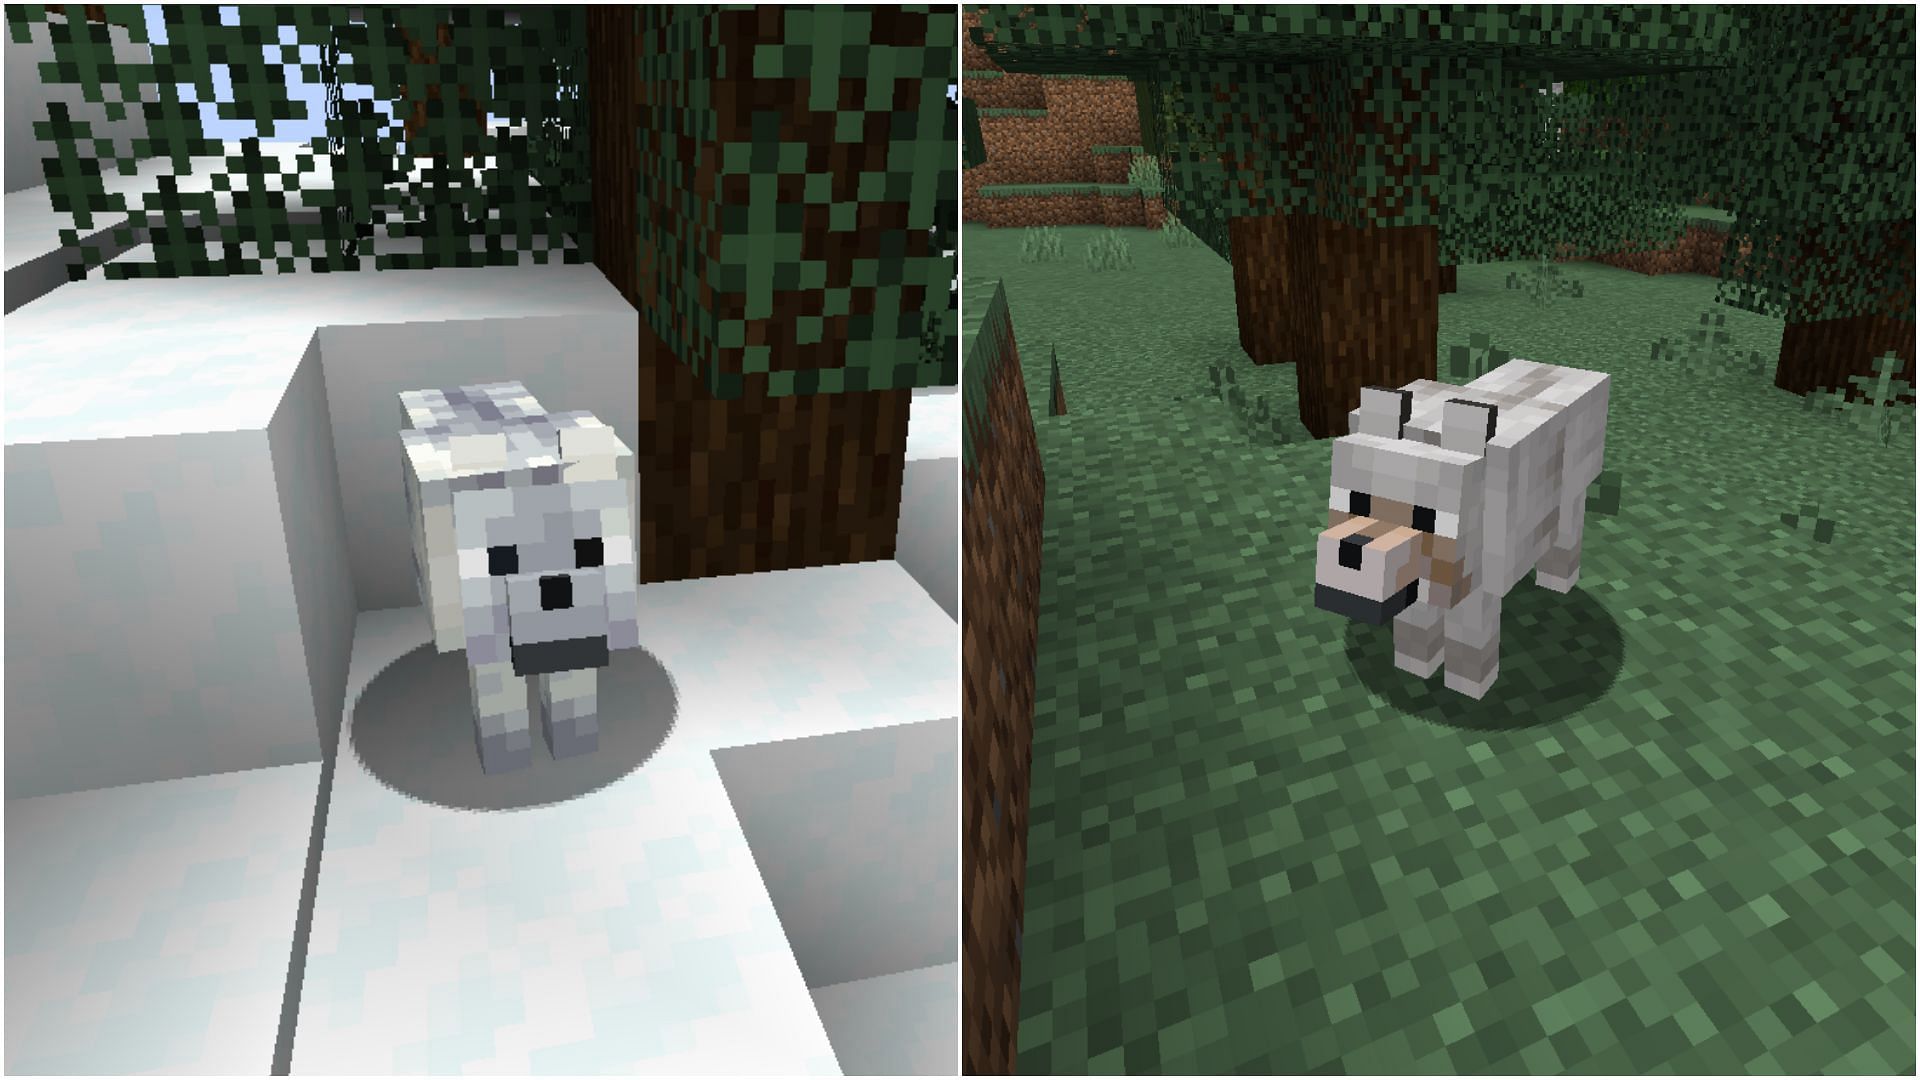 This seed is near biomes spawning pale and snowy wolves (Image via Mojang Studios)